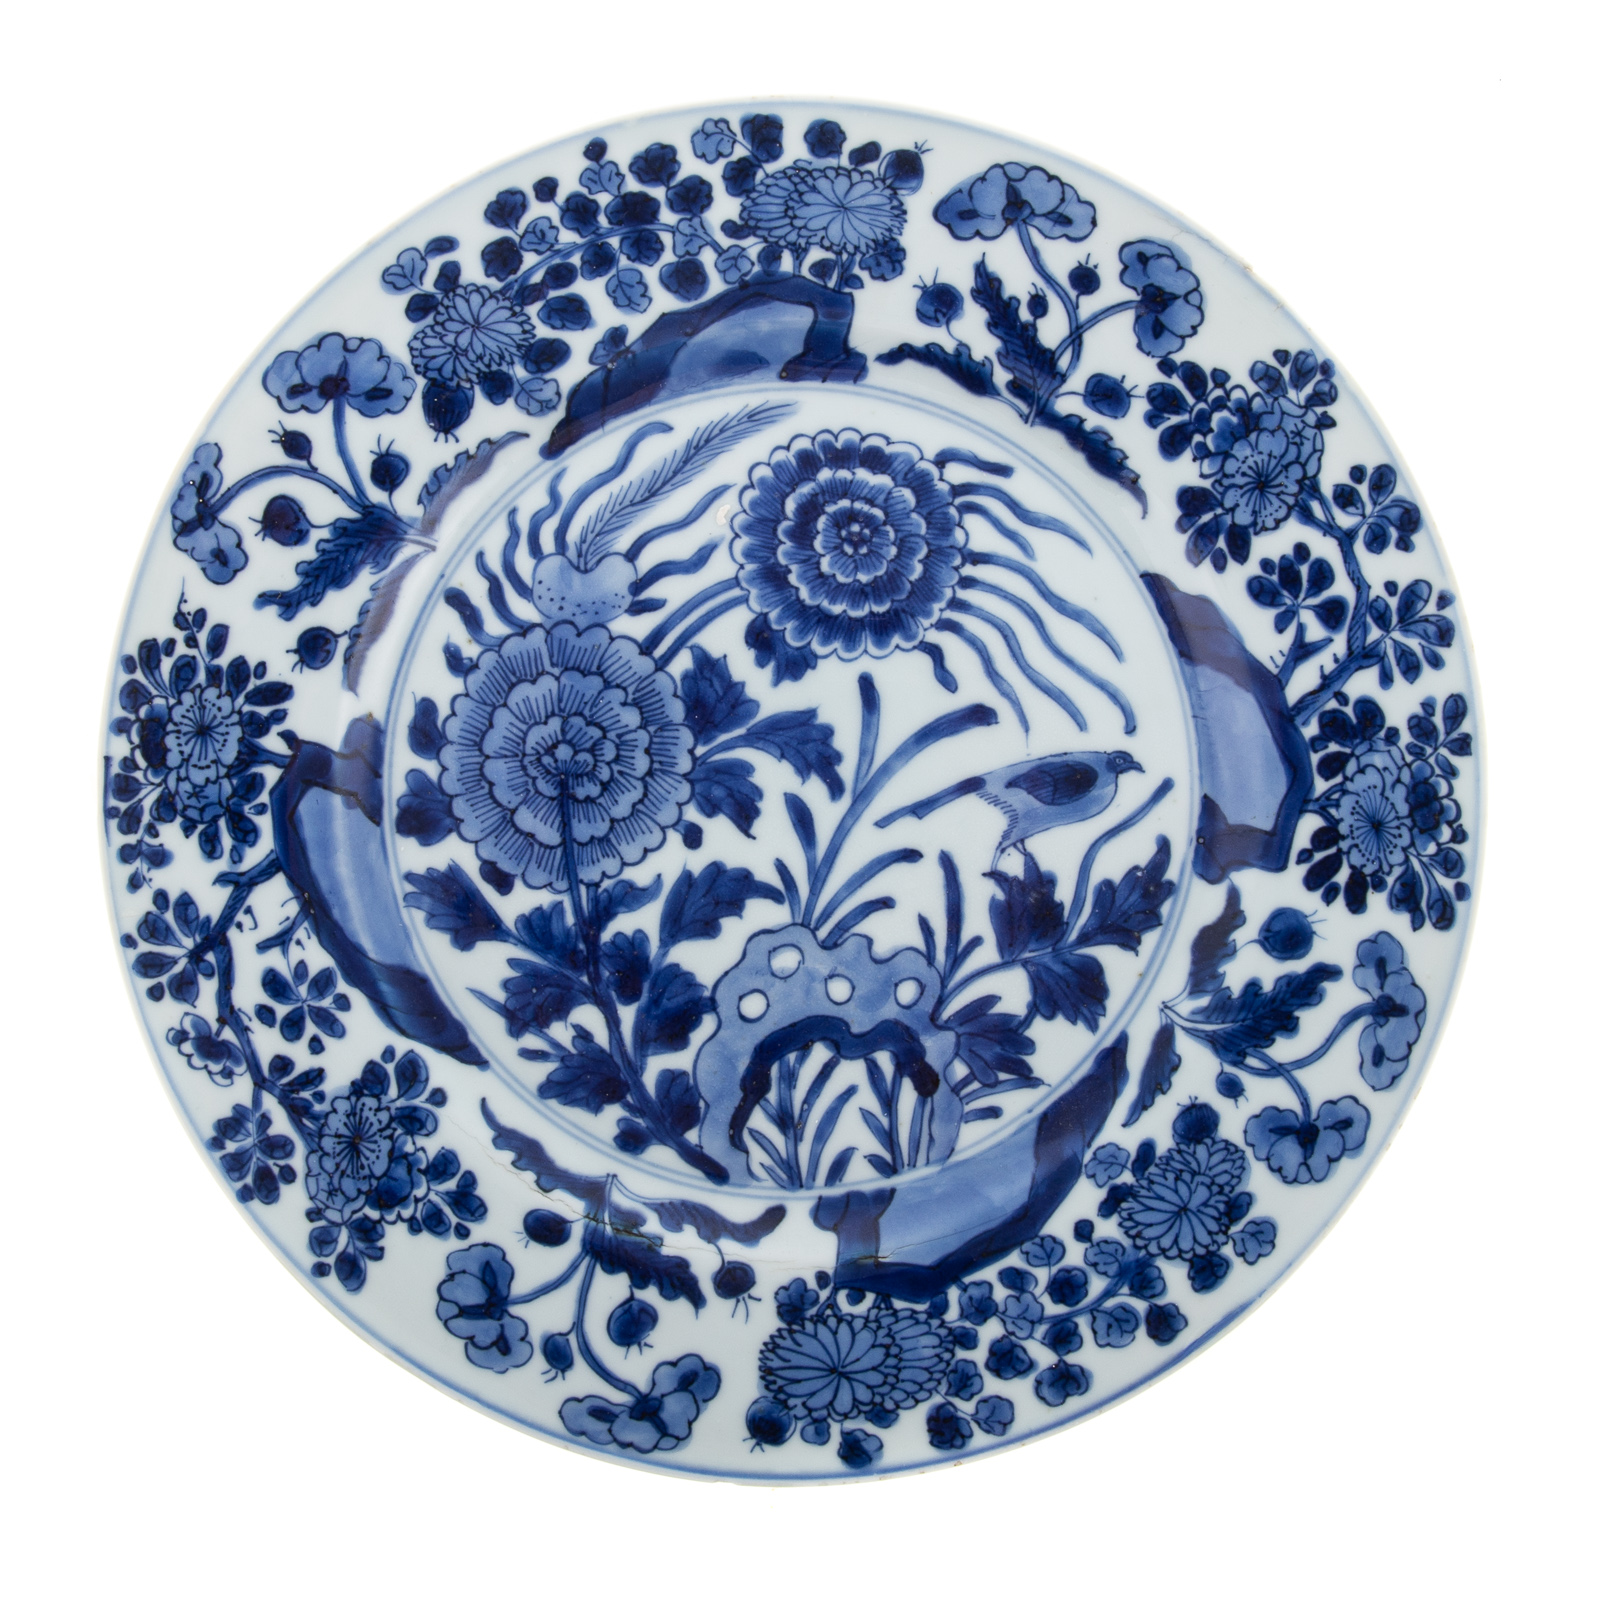 CHINESE EXPORT BLUE/WHITE PLATE Kang